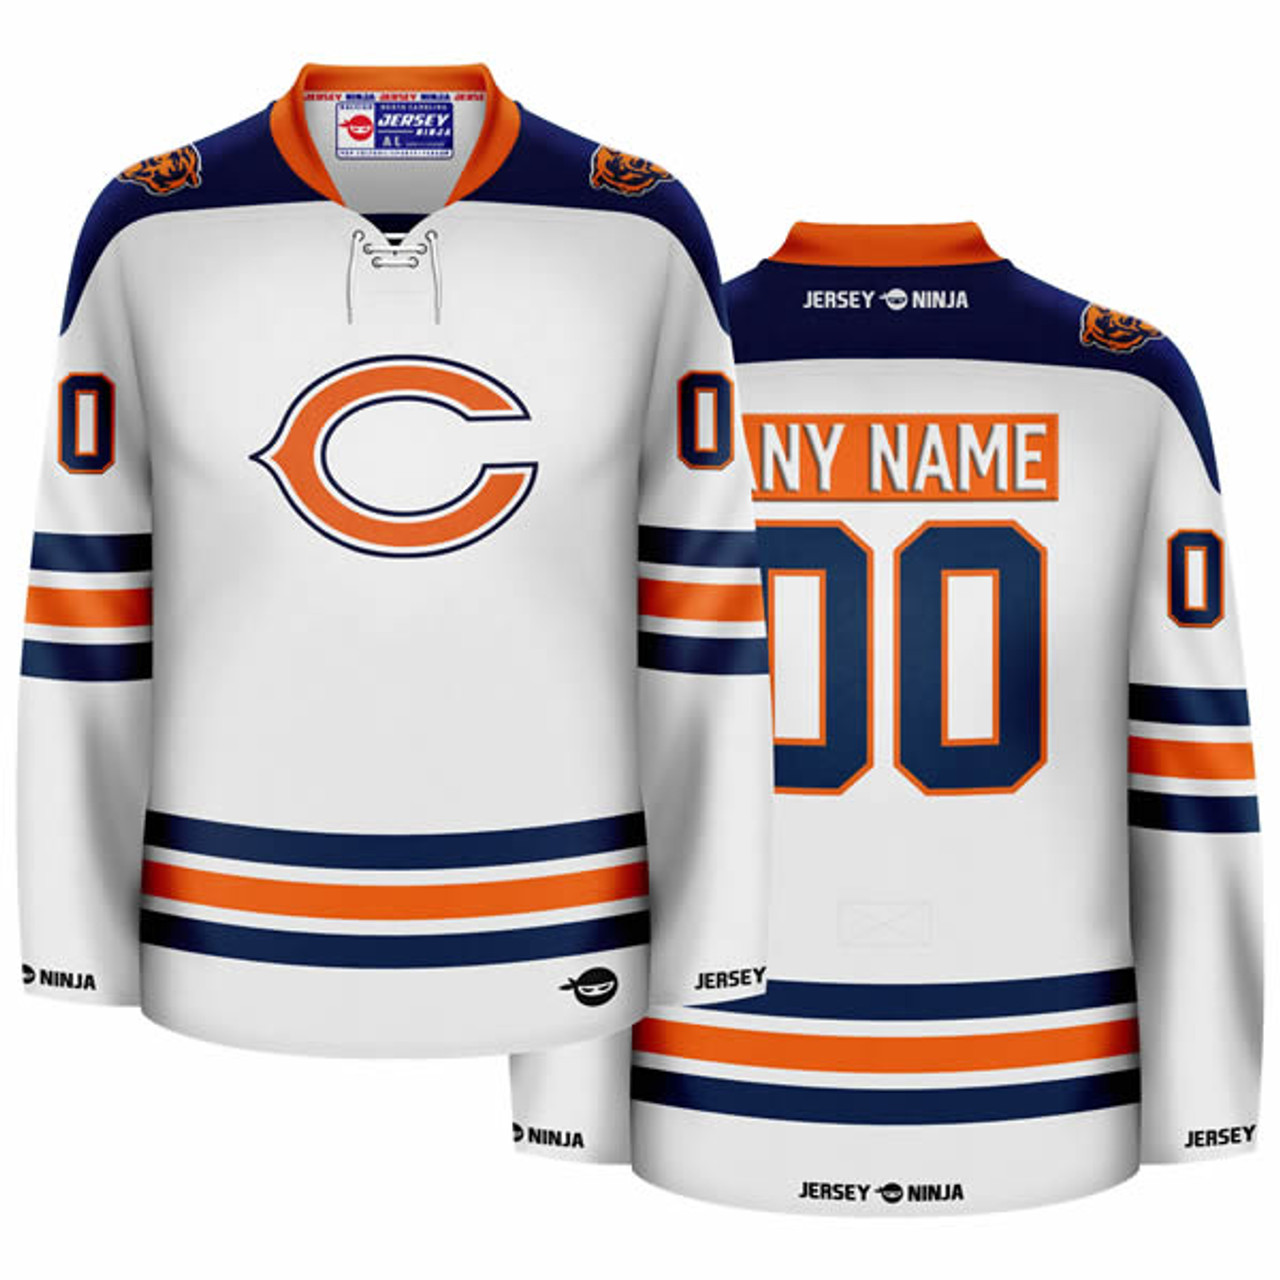 NHL MLB Replica Chicago Cubs Hockey Jersey. Customizable. Any name